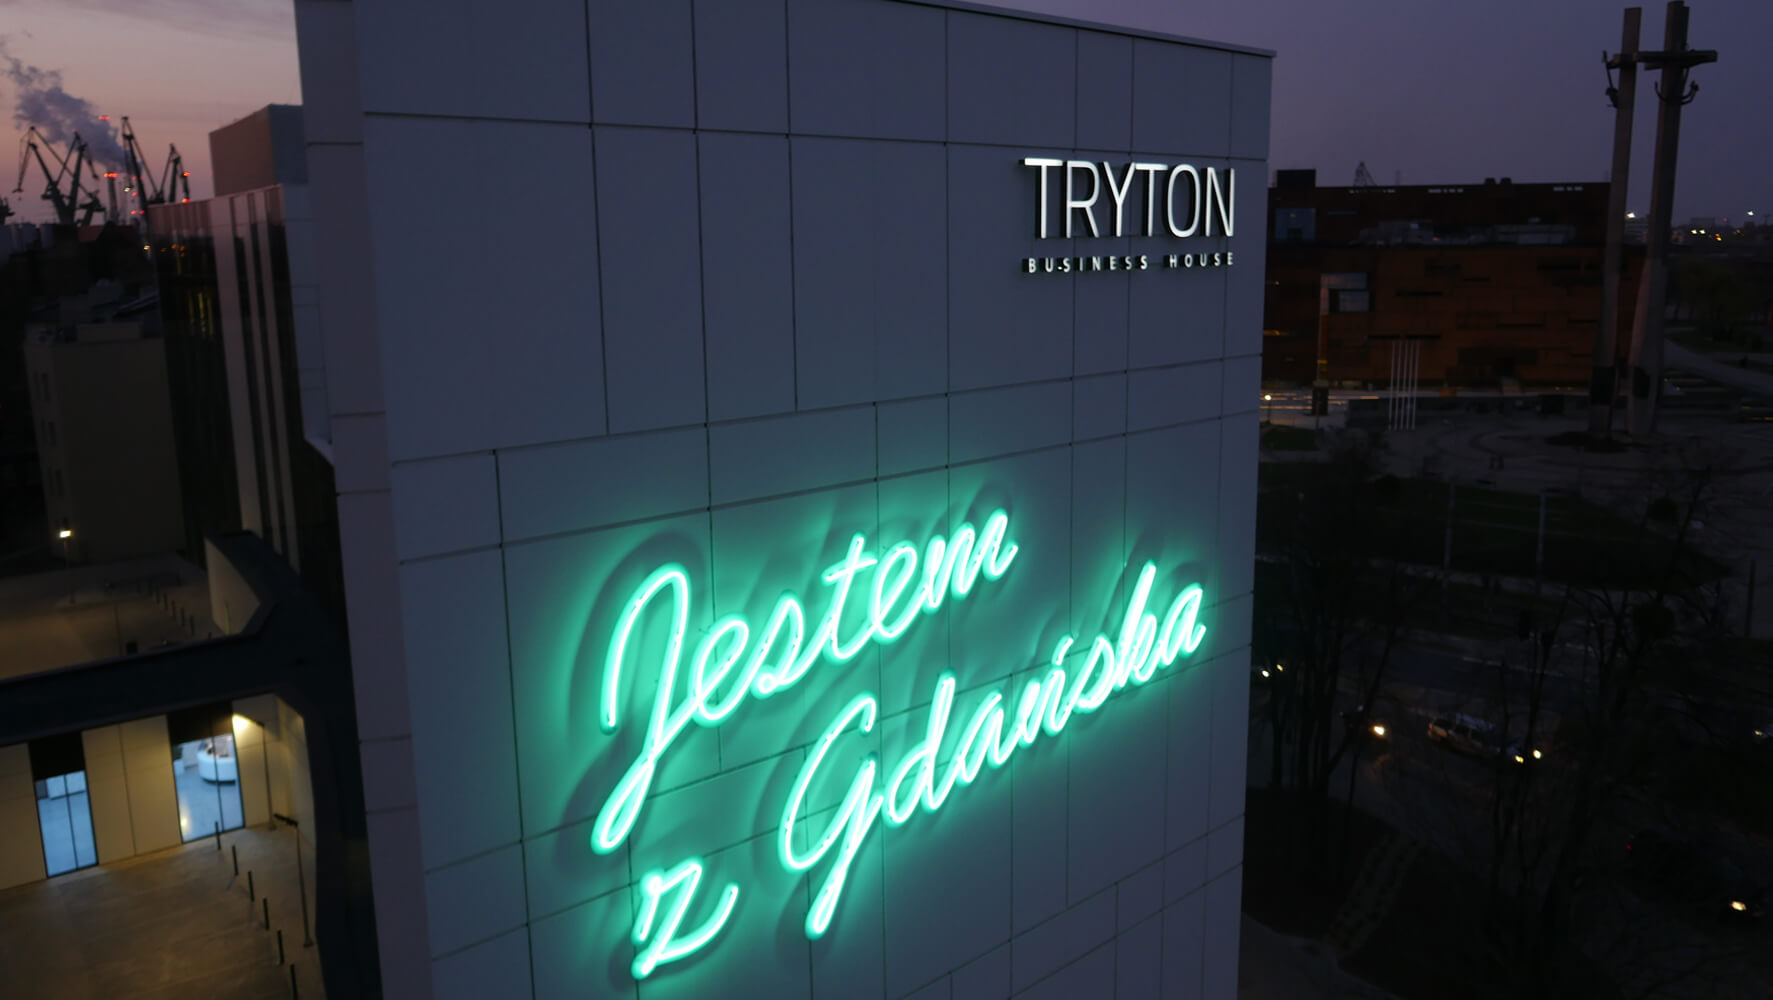 Triton - Triton - the inscription "I am from Gdansk" created with neon signs, placed on the facade